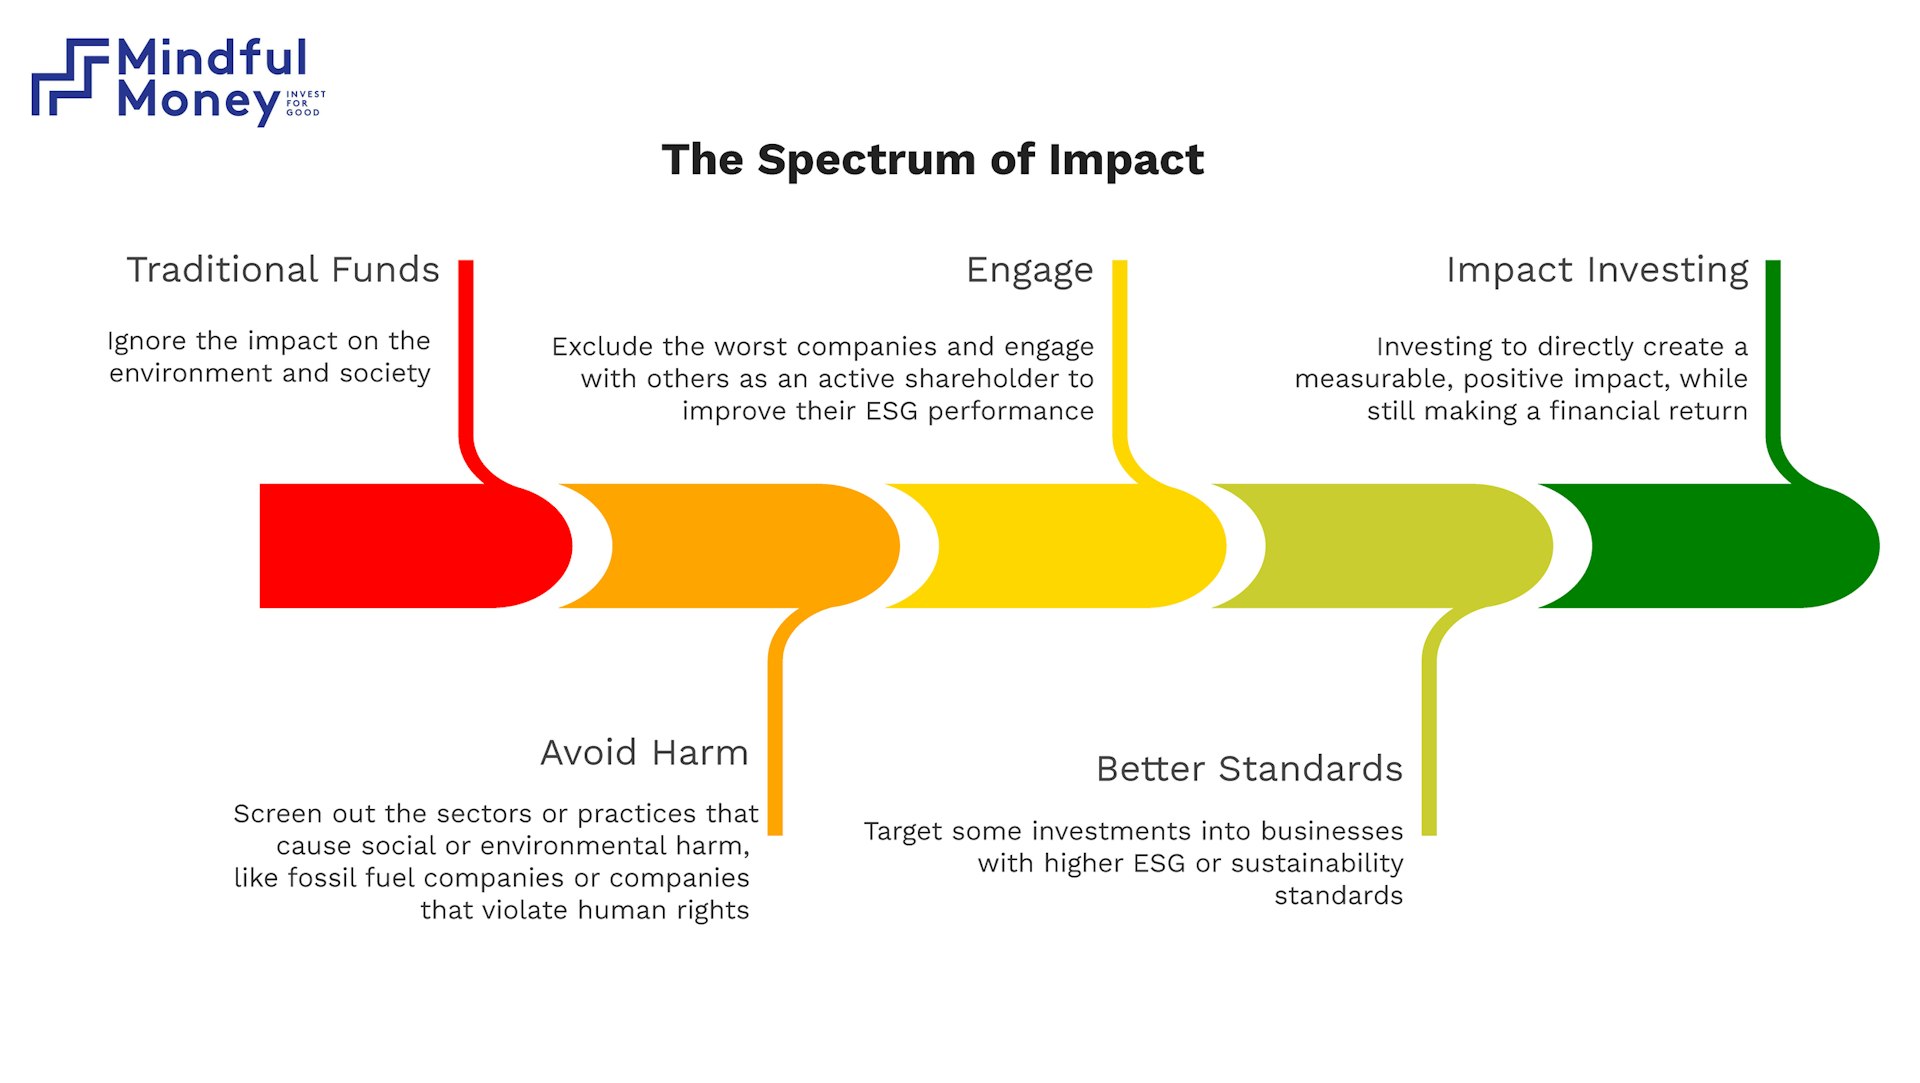 The spectrum of impact spans five phases from 'traditional funds' to 'impact investing'. 'Traditional funds' ignore the impact on the environment and society. 'Avoid harm' — screens out the sectors or practices that cause societal or environmental harm, like fossil fuel companies or companies that violate human rights. 'Engage' — exclude the worst companies and engage with others as an active shareholder to improve their ESG performance. 'Better standards' — target some investments into businesses with higher ESG or sustainability standards. 'Impact investing' — investing to directly create a measurable, positive impact while still making a financial return.